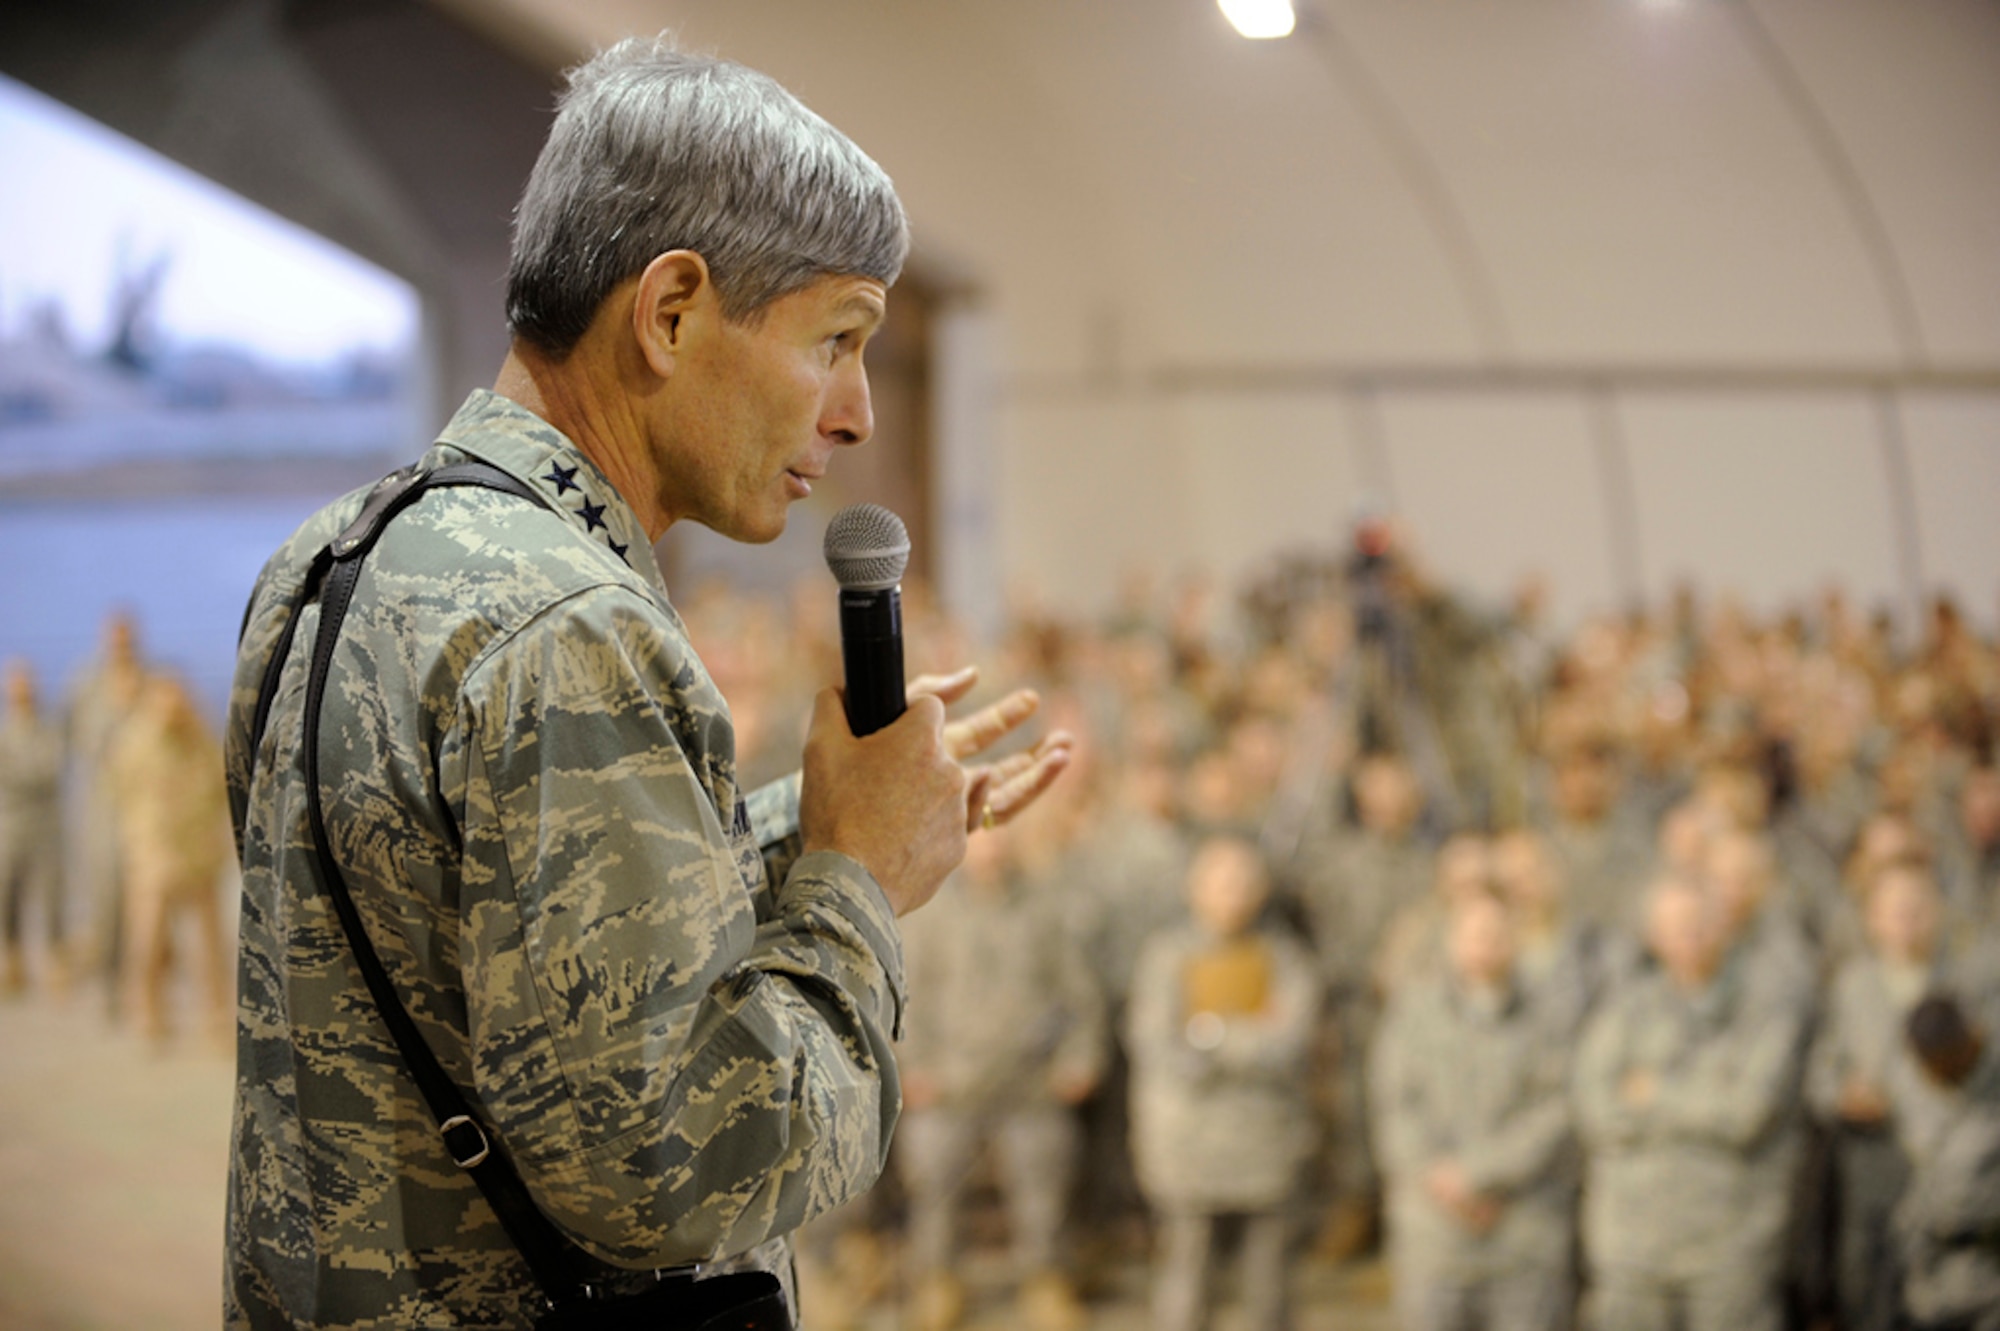 Air Force Chief of Staff Gen. Norton Schwartz speaks at an Airman's Call at Joint Base Balad, Iraq, during a recent tour of Southwest Asia installations.  General Schwartz announced Dec. 17 that an Airman previously categorized as filling an "in lieu of" or ILO tasking now would be referred to as filling a "joint expeditionary tasking," or JET.  He stated that the term JET reinforces the Air Force's commitment to the joint fight as an equal member of the joint team.  (U.S. Air Force photo/Airman 1st Class Jason Epley)